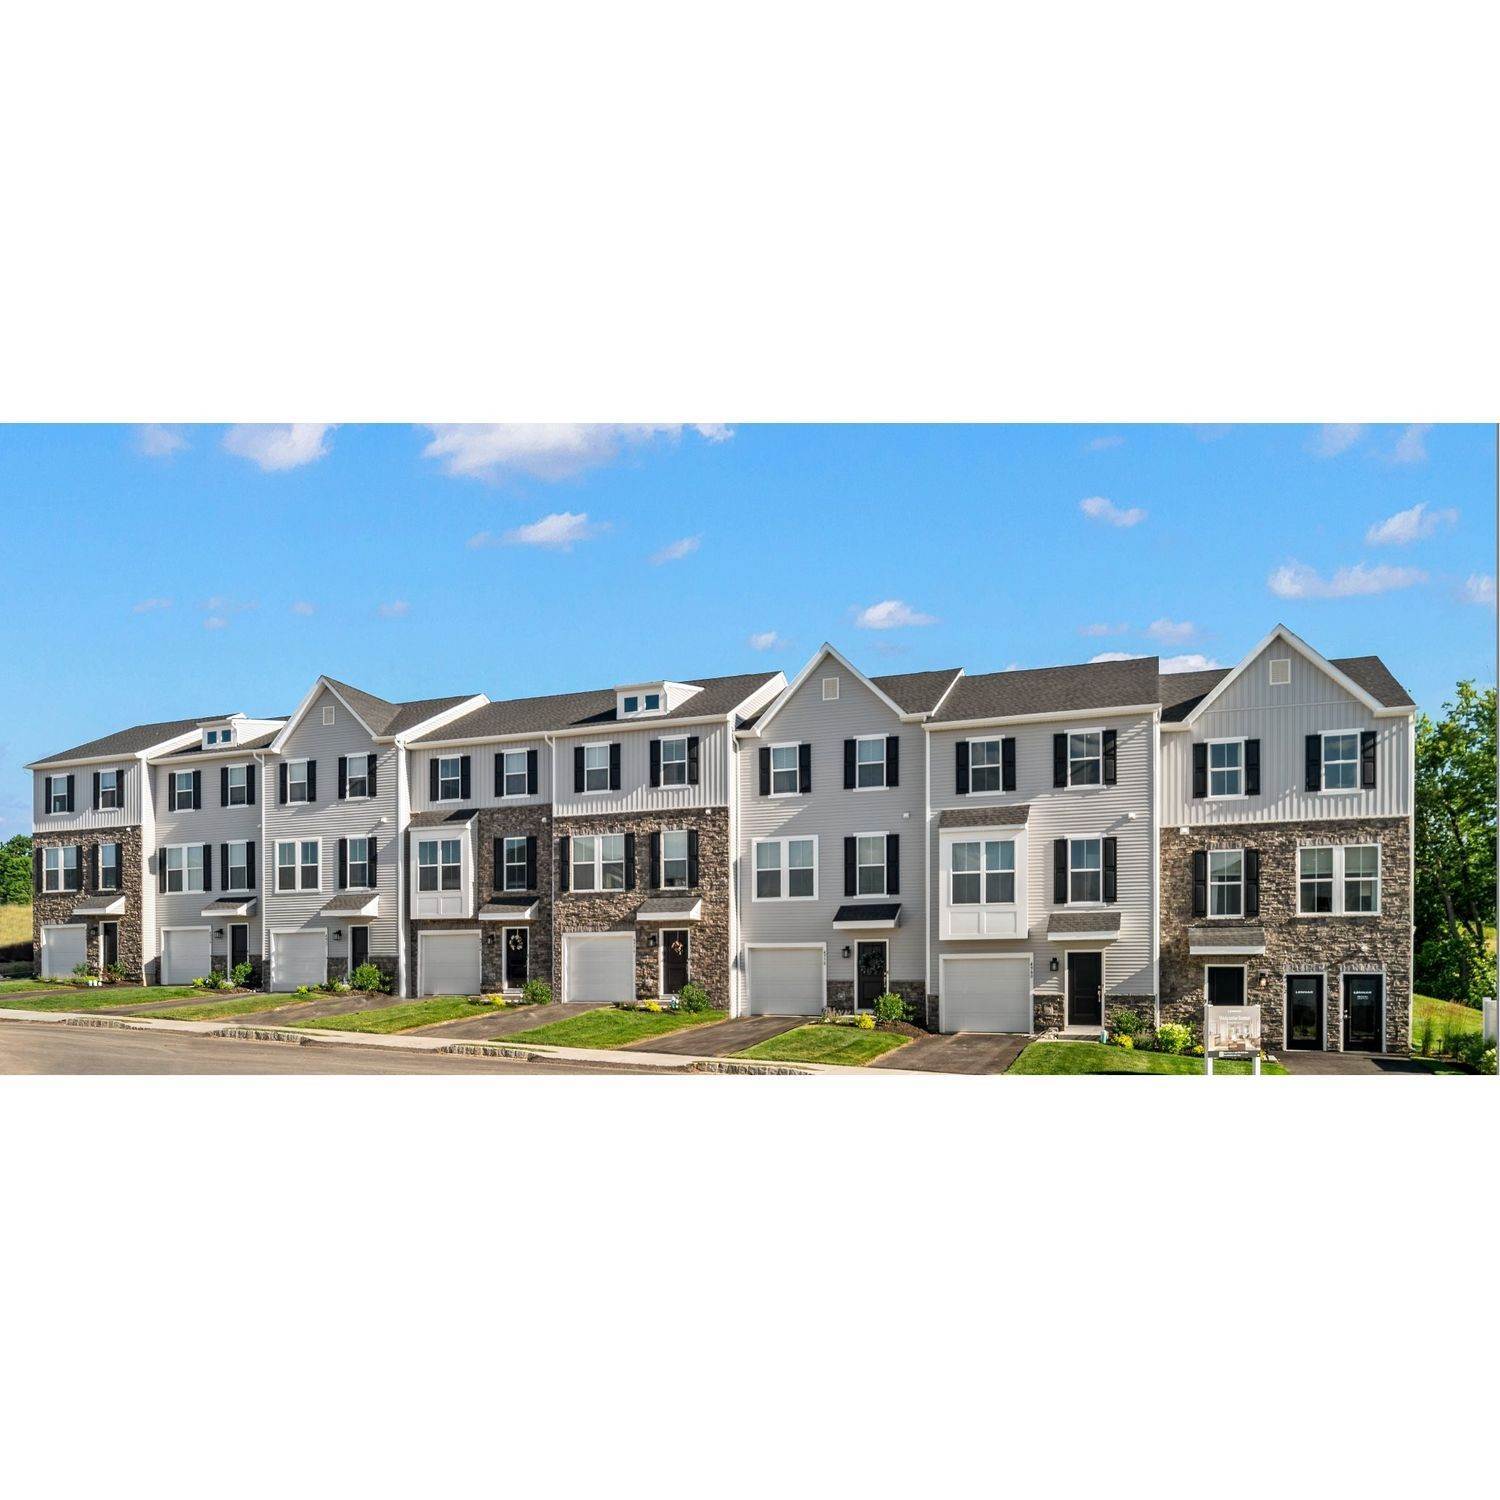 The Townes at Brookside Court xây dựng tại 7596 Clayton Avenue, Coopersburg, PA 18036